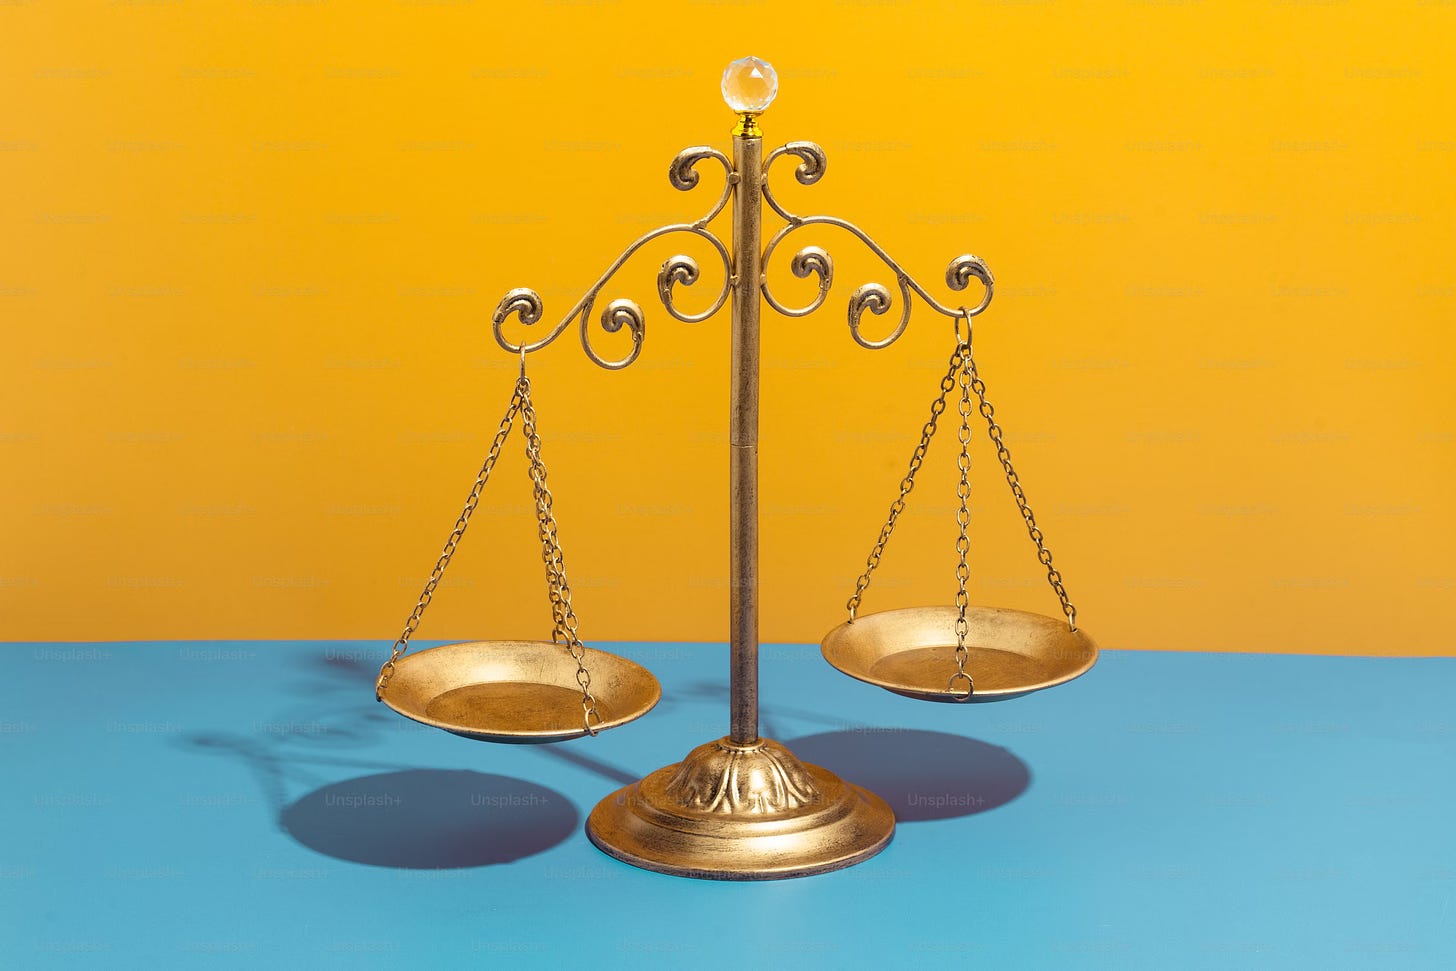 A gold variation on the scales of Justice sitting atop a blue surface on a yellow background.